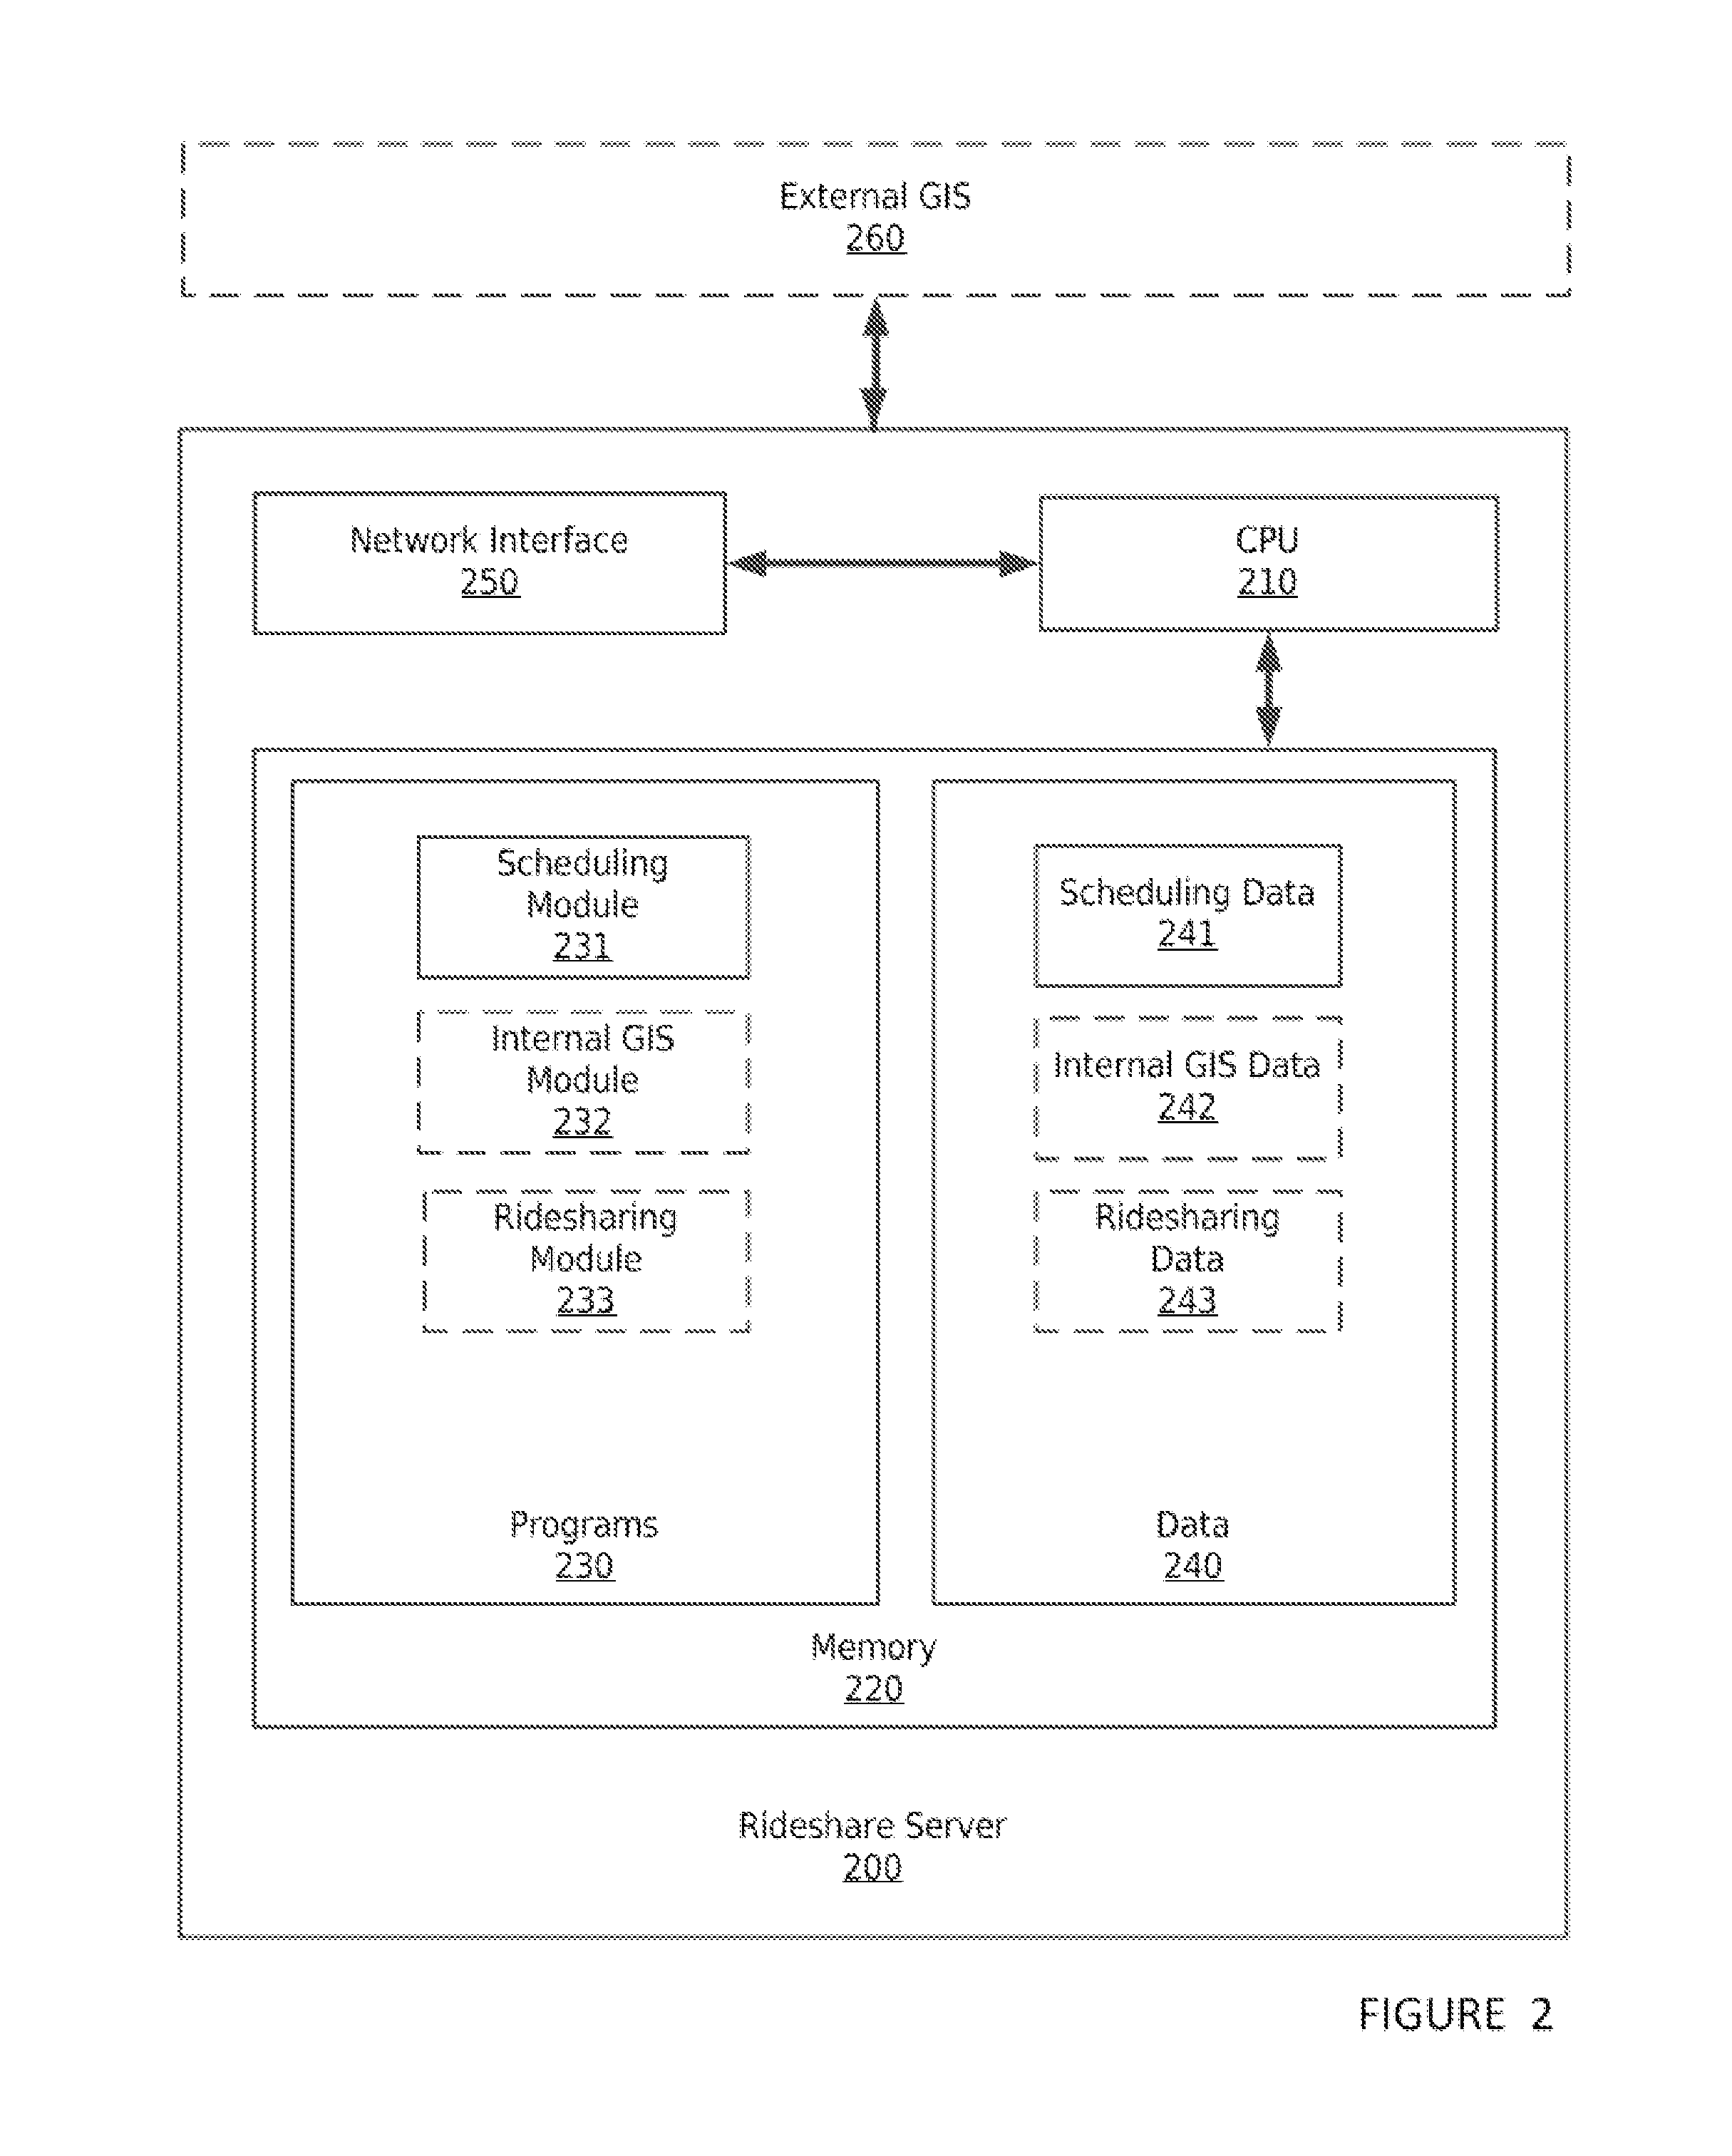 Method for facilitating automatic scheduling of a rideshare trip